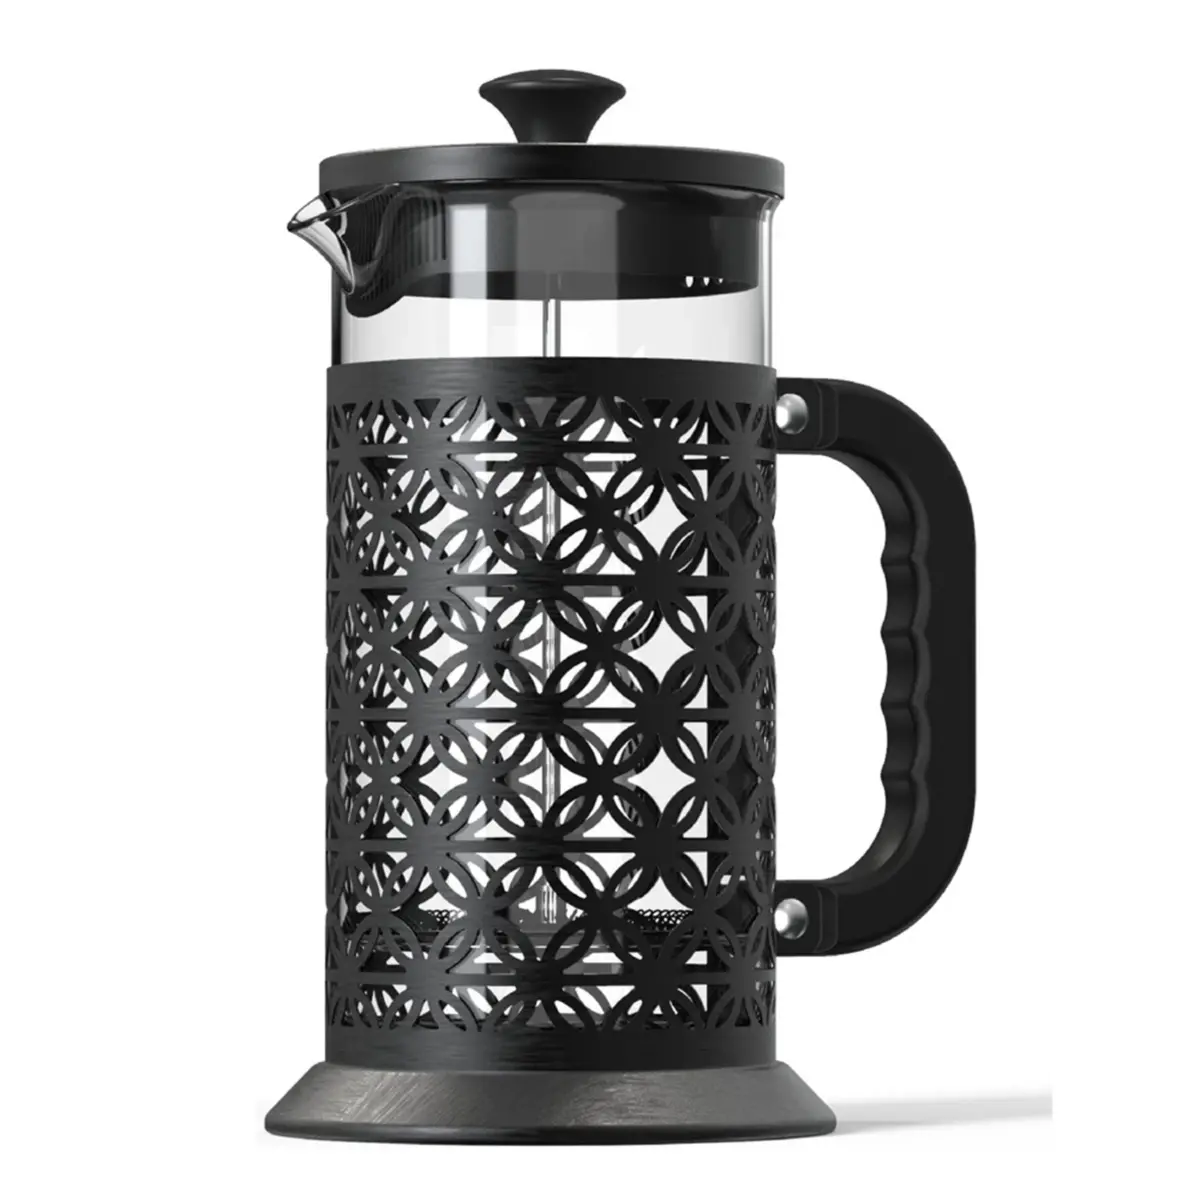 Heat-resistant French press for perfect cups every time